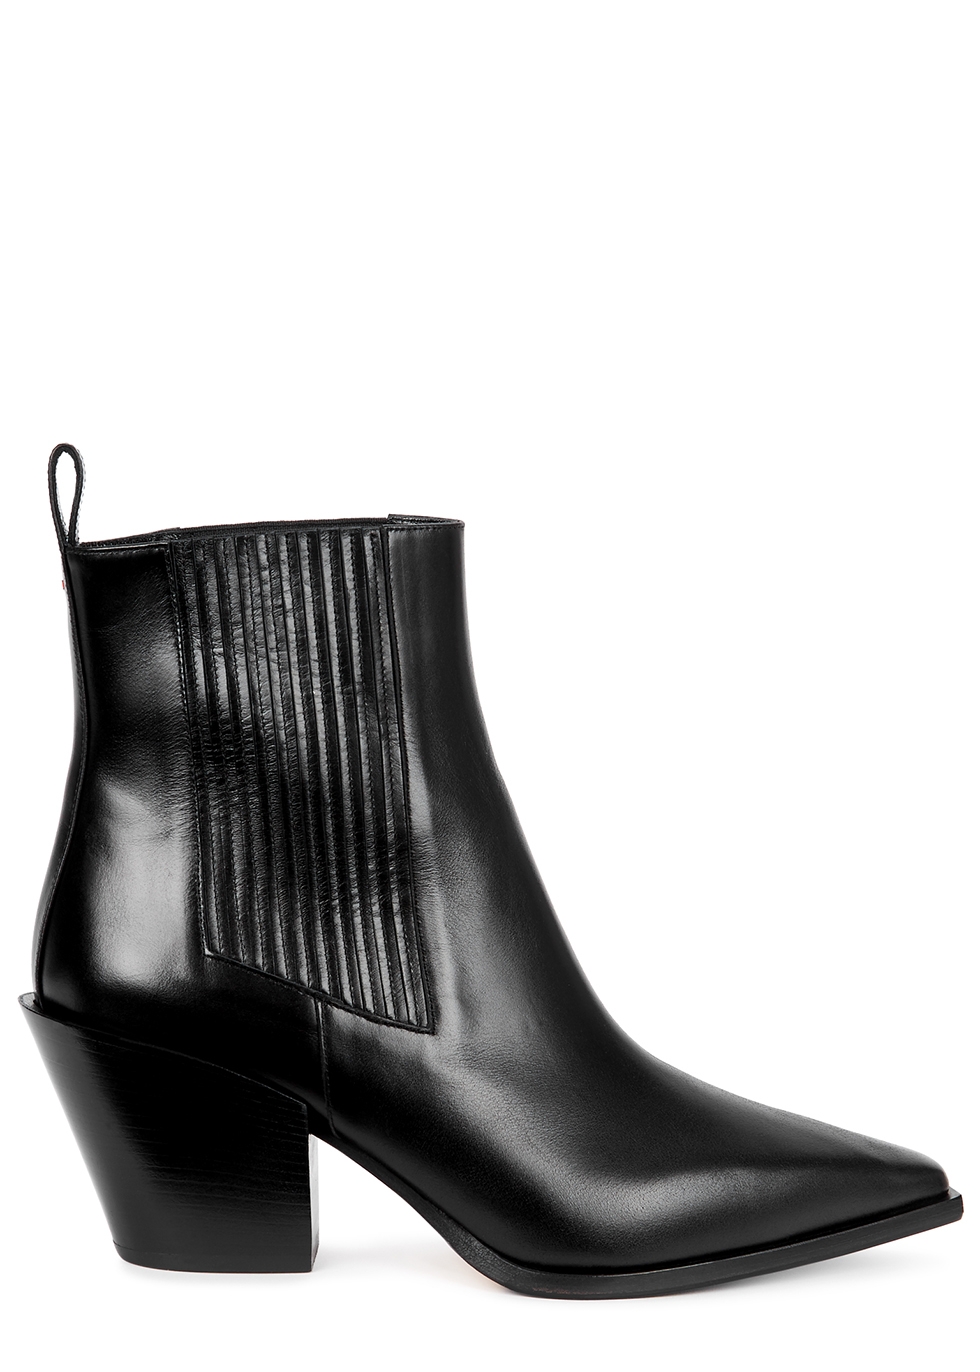 aeyde Kate black leather ankle boots - Harvey Nichols